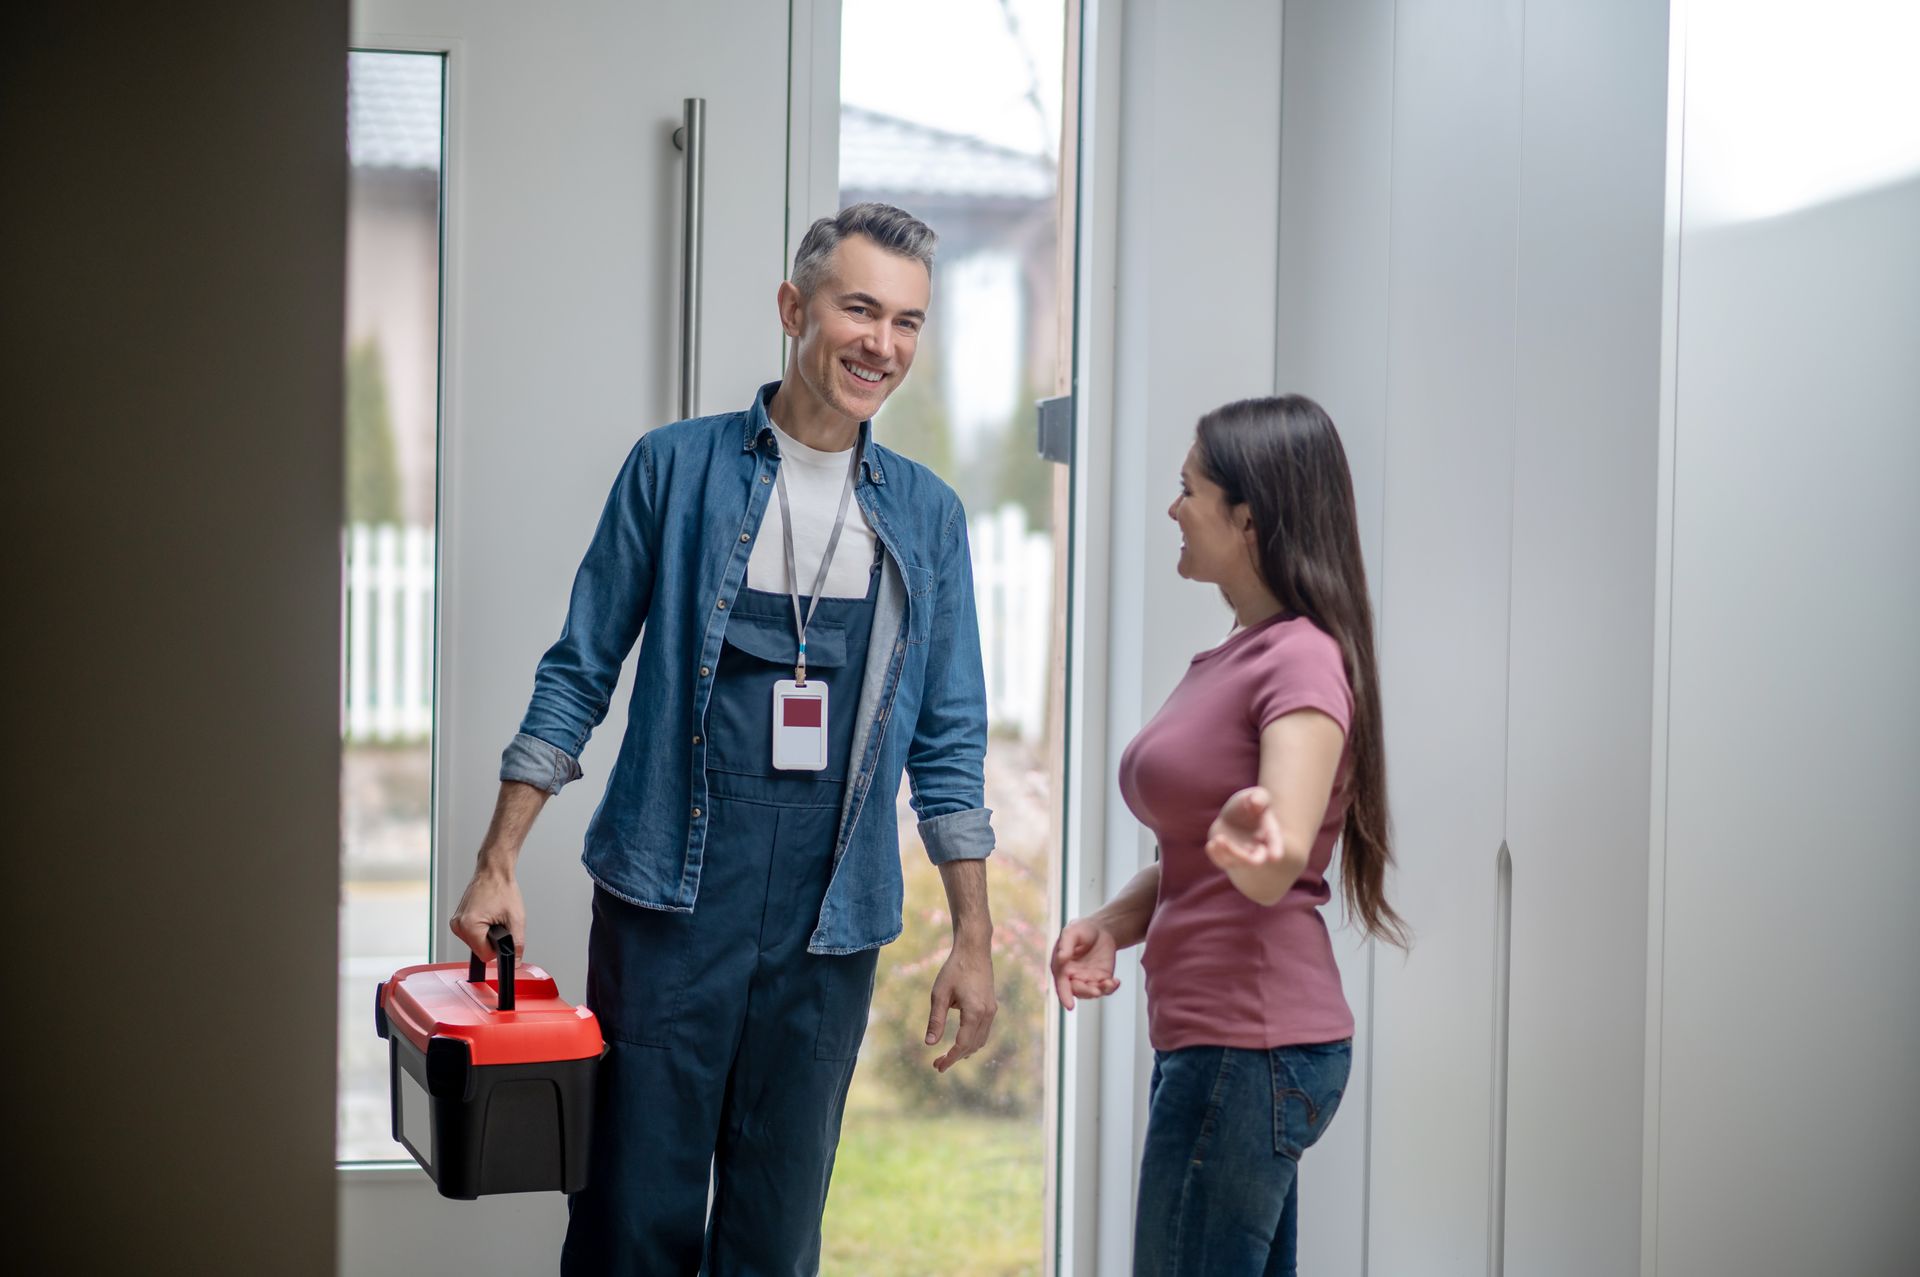 A man is holding a toolbox and talking to a woman.